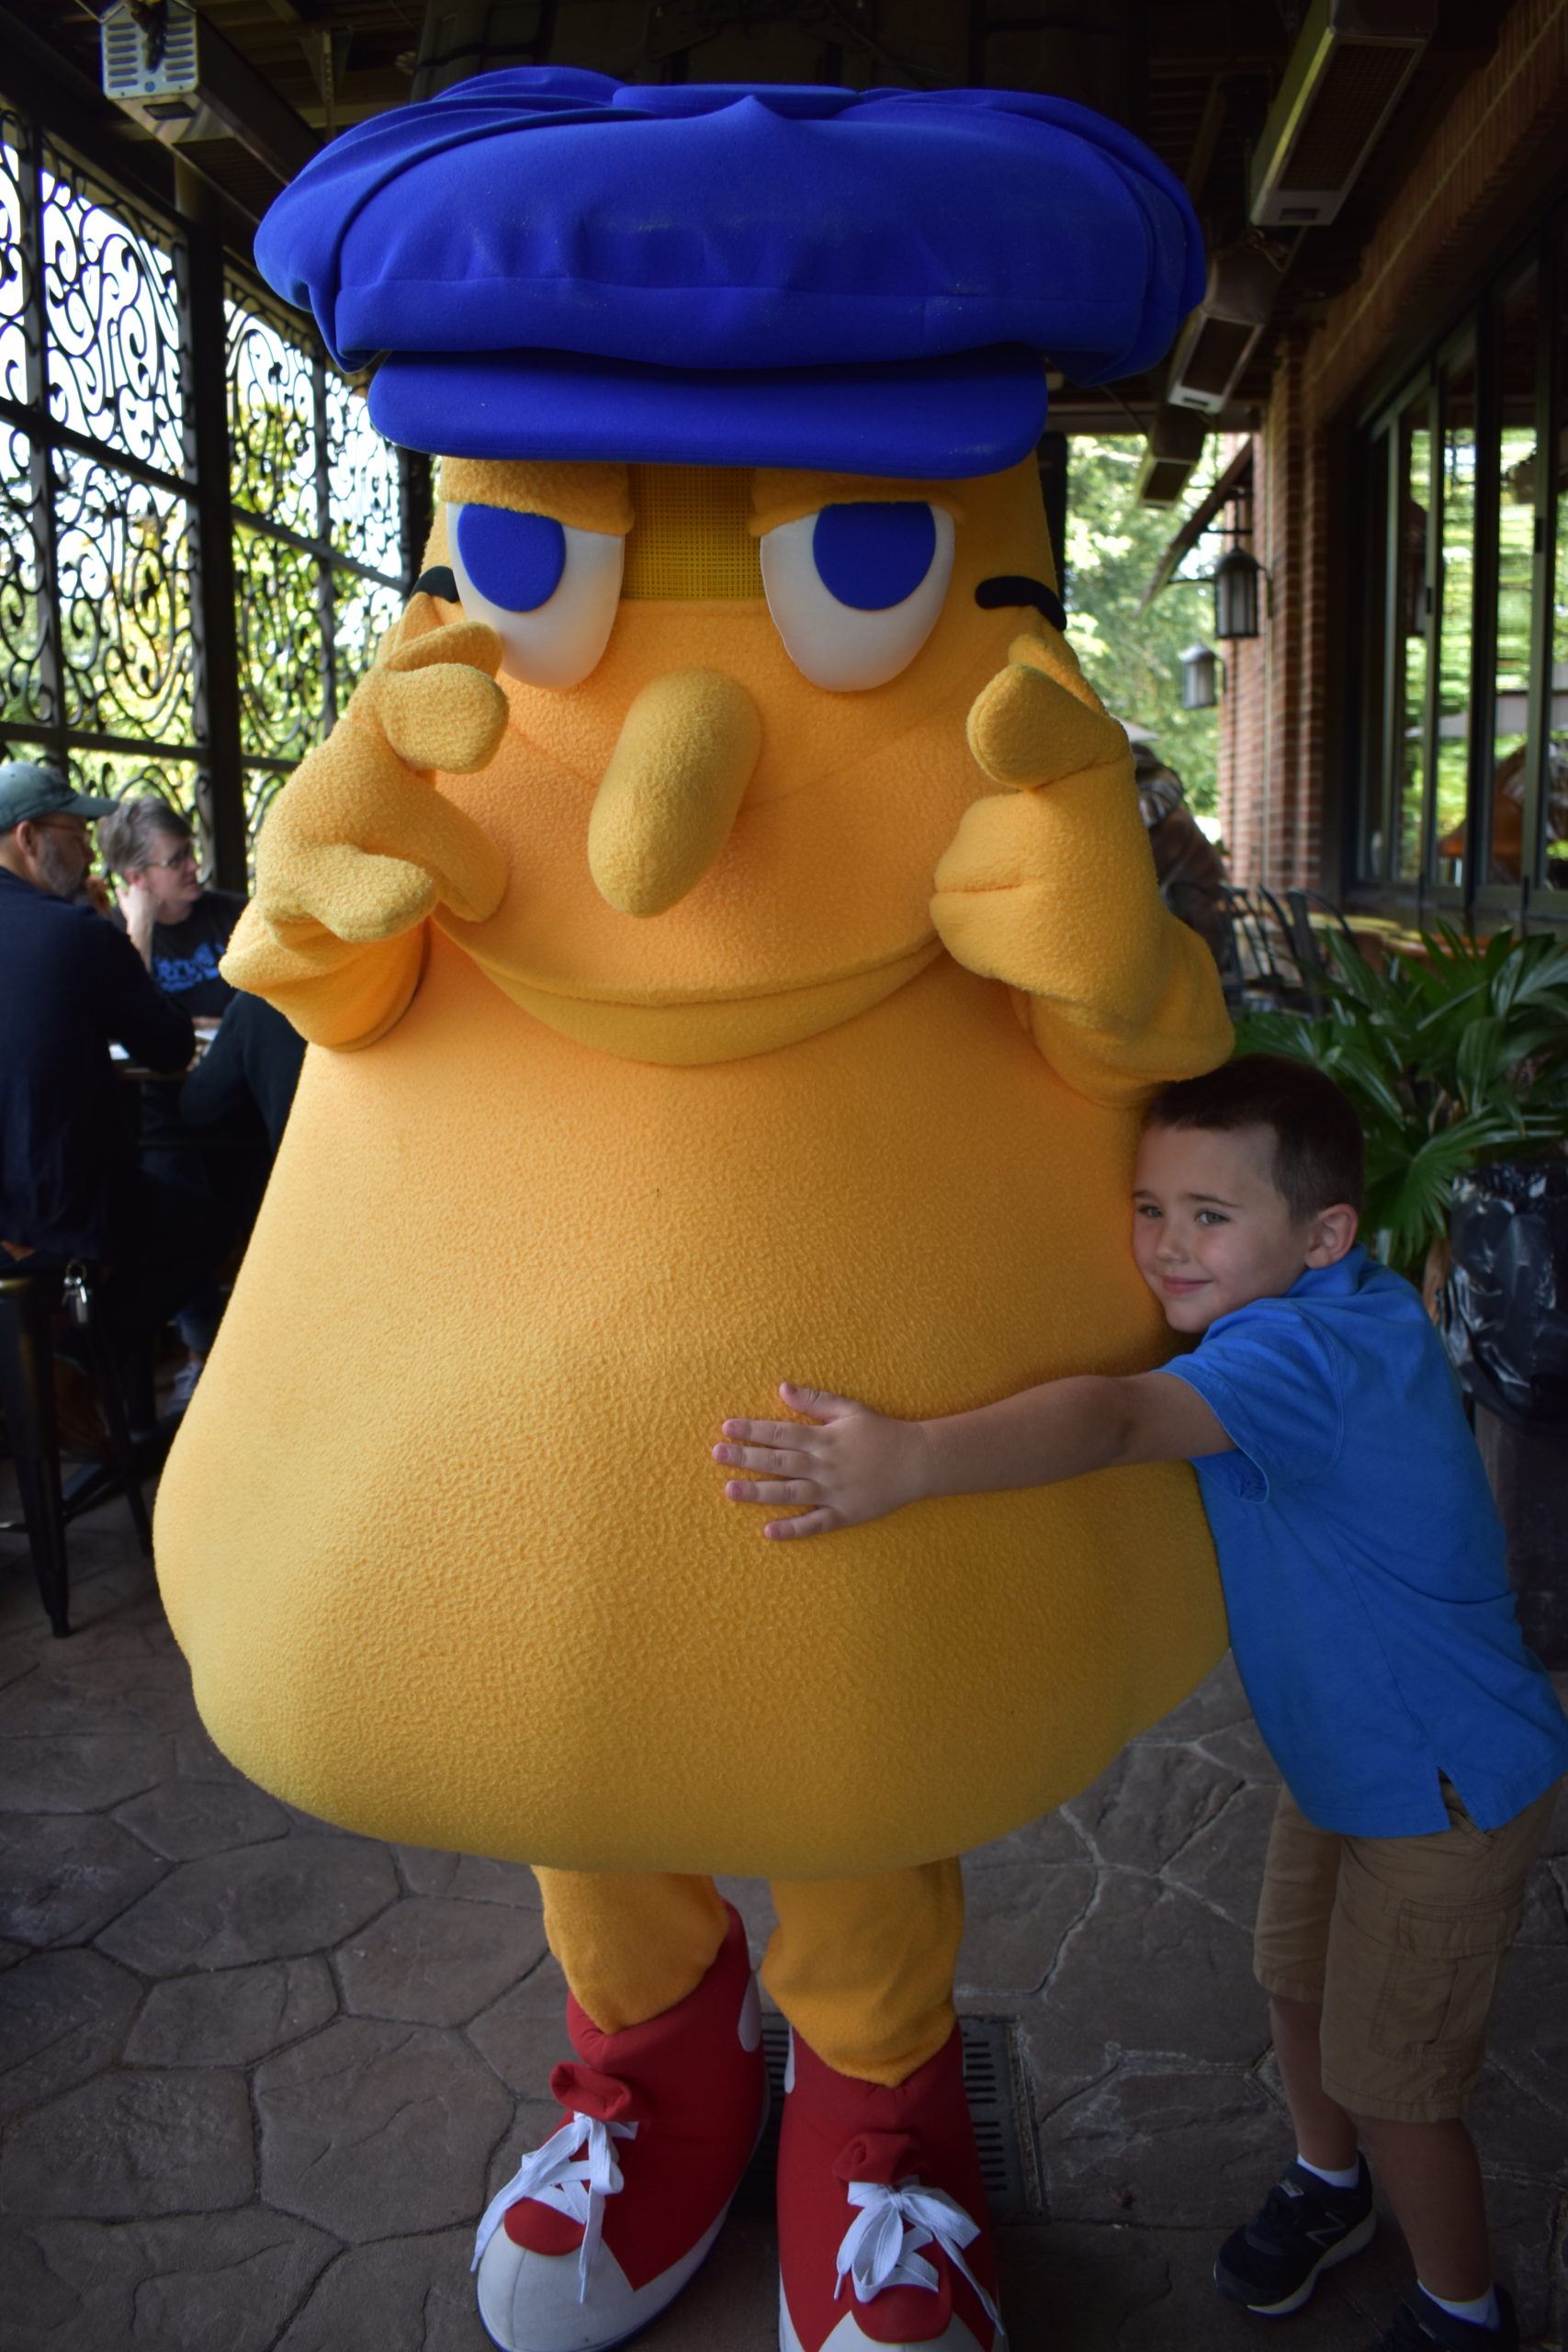 Image a child hugging a person wearing a yellow mushroom costume